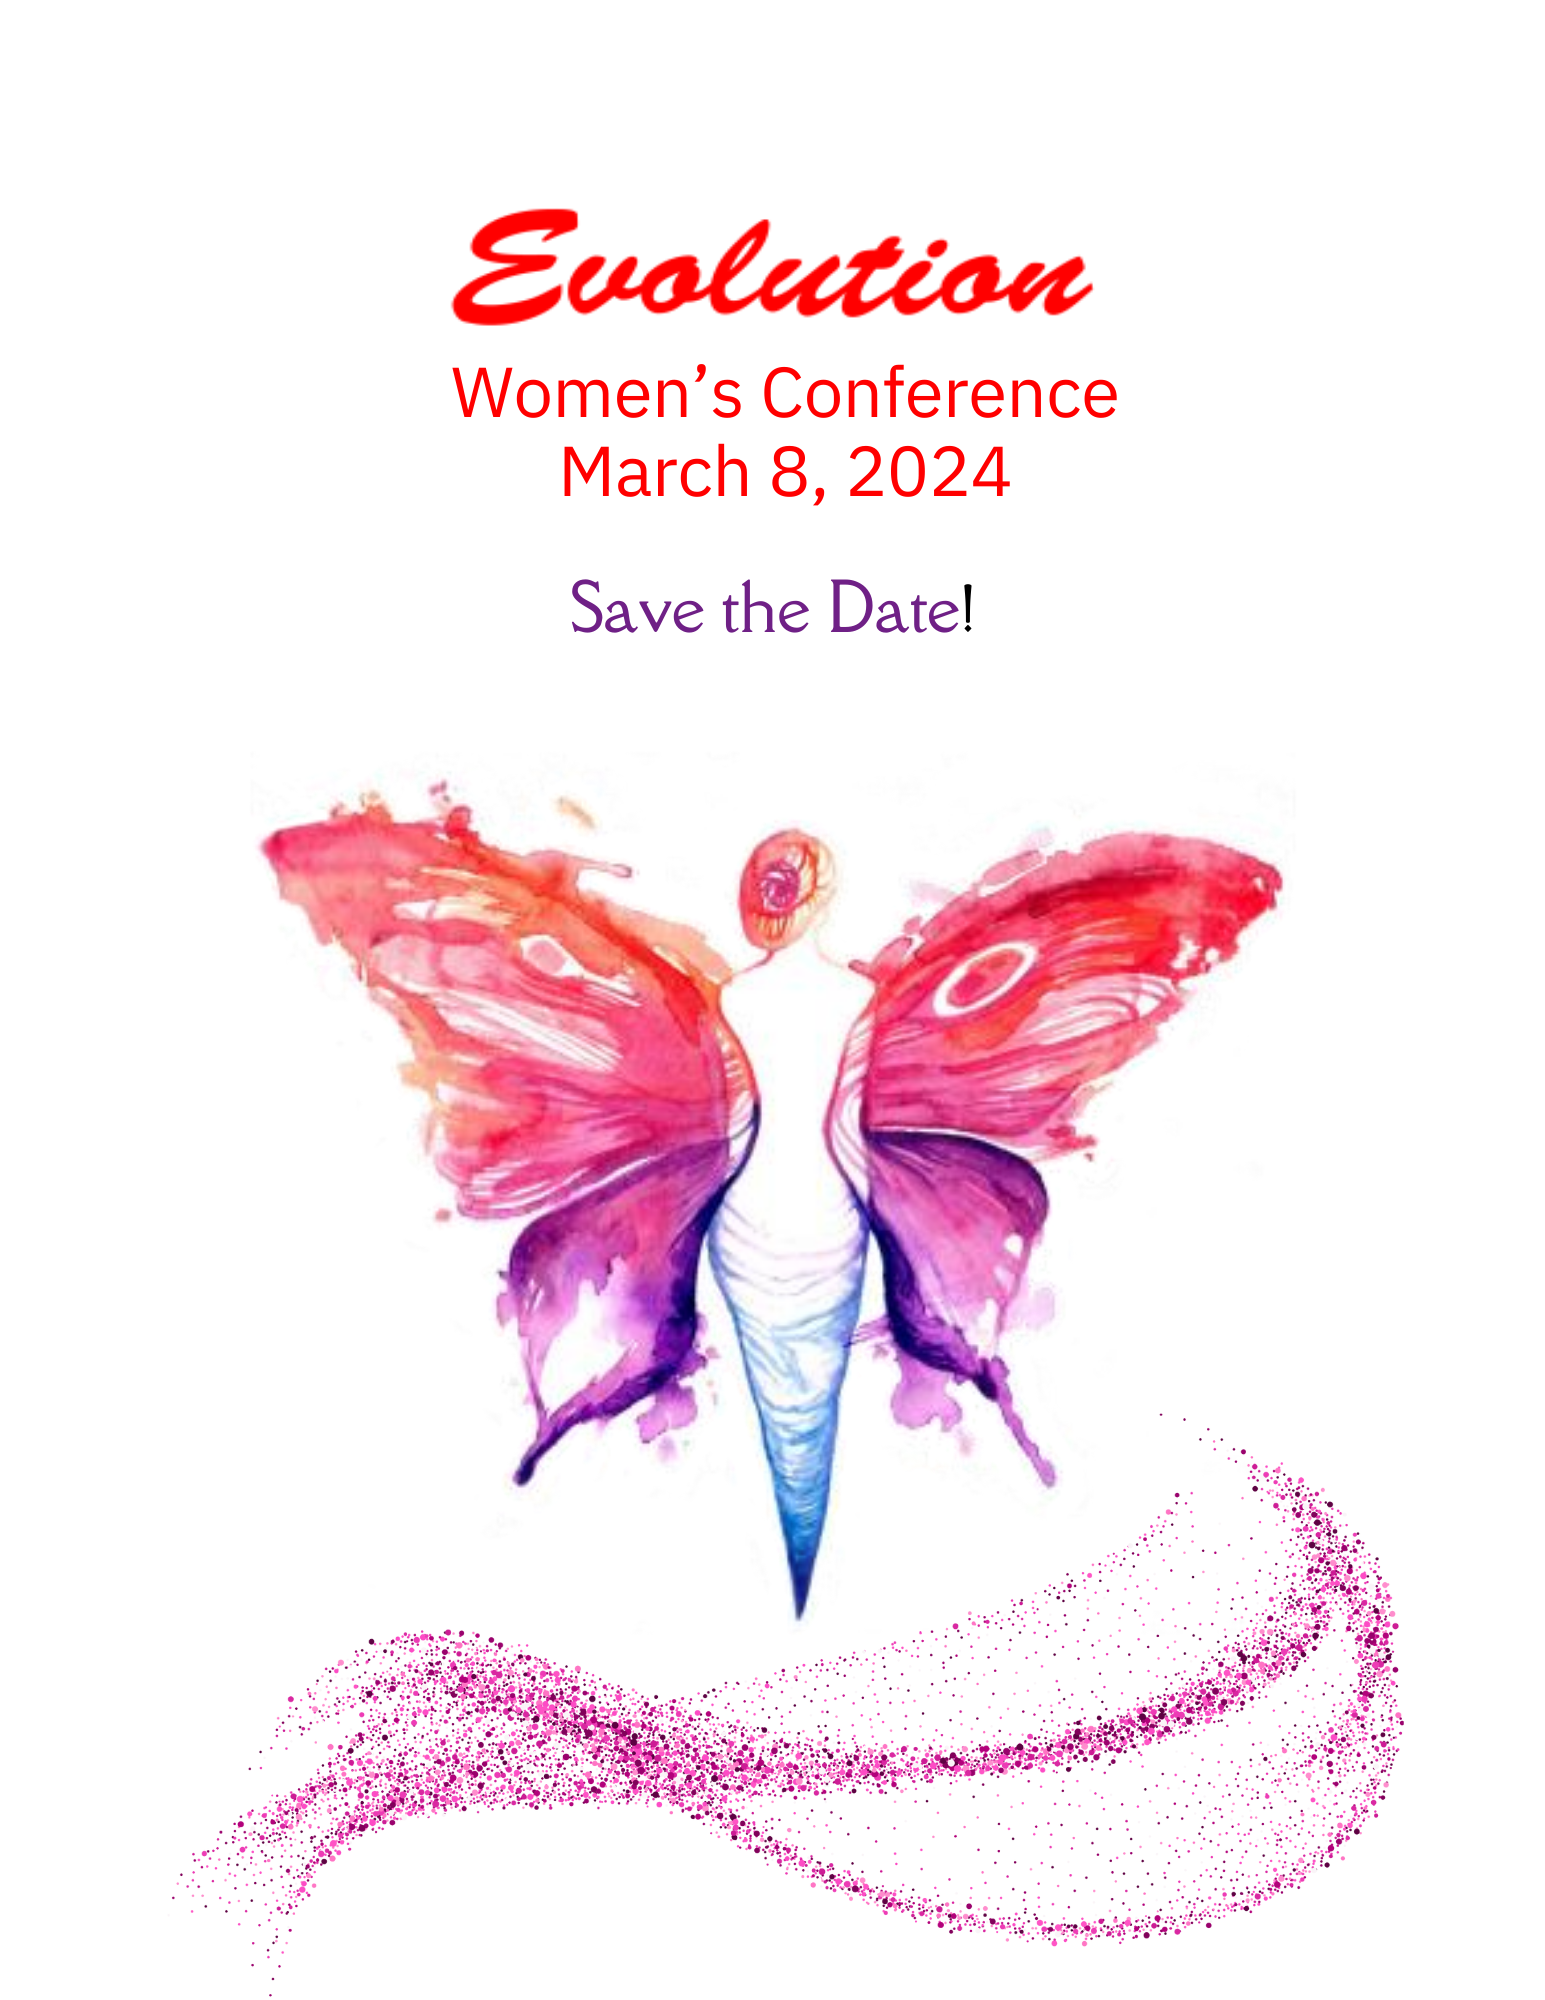 Brighton Chamber of Commerce 6th Annual Evolution Women’s Conference